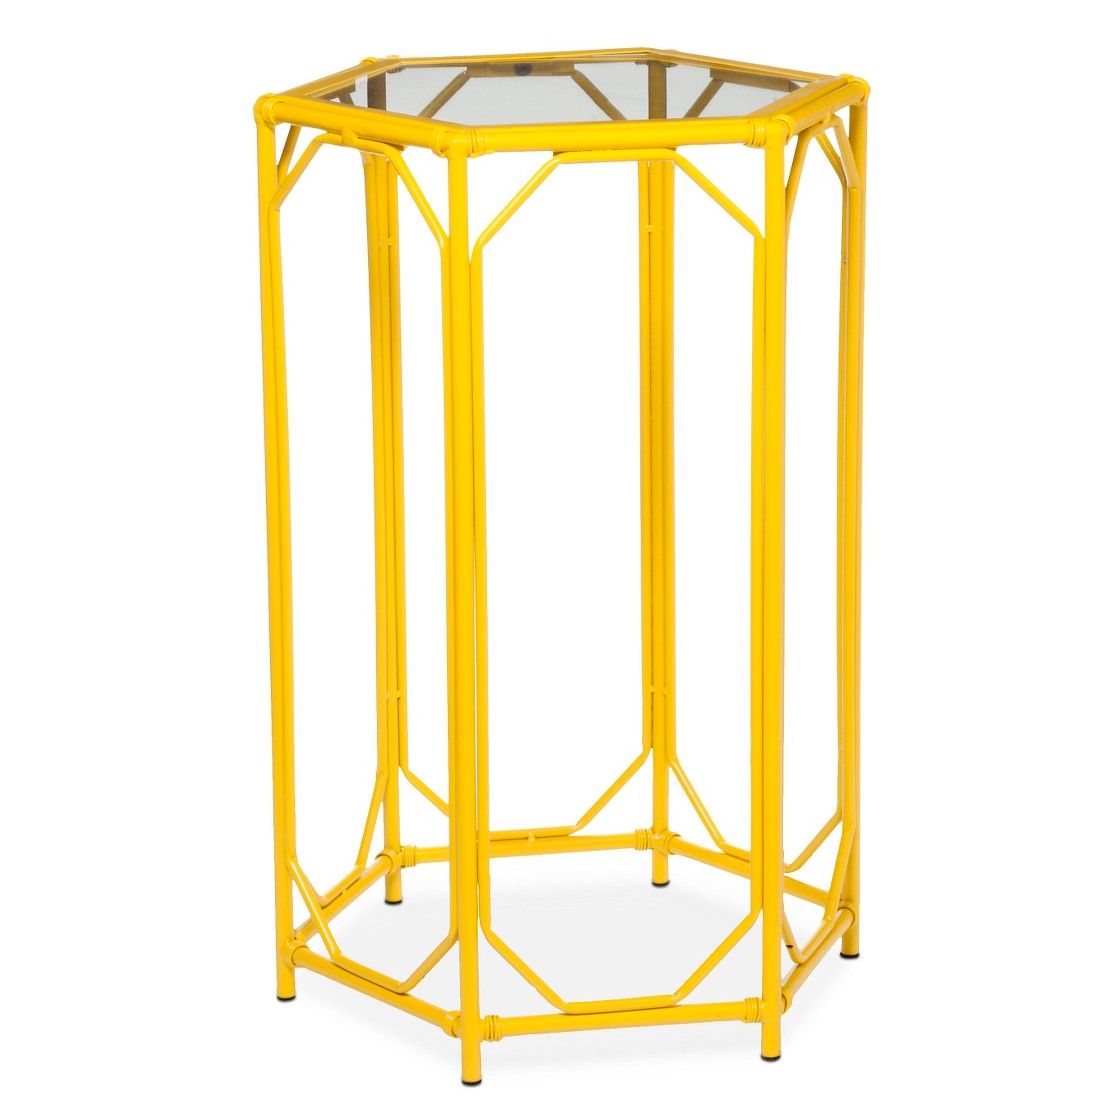 threshold bamboo motif accent table yellow wishlist home fretwork teal nautical dining room sofa ideas foyer mirror patio cover breakfast chairs garden furniture weekend solid